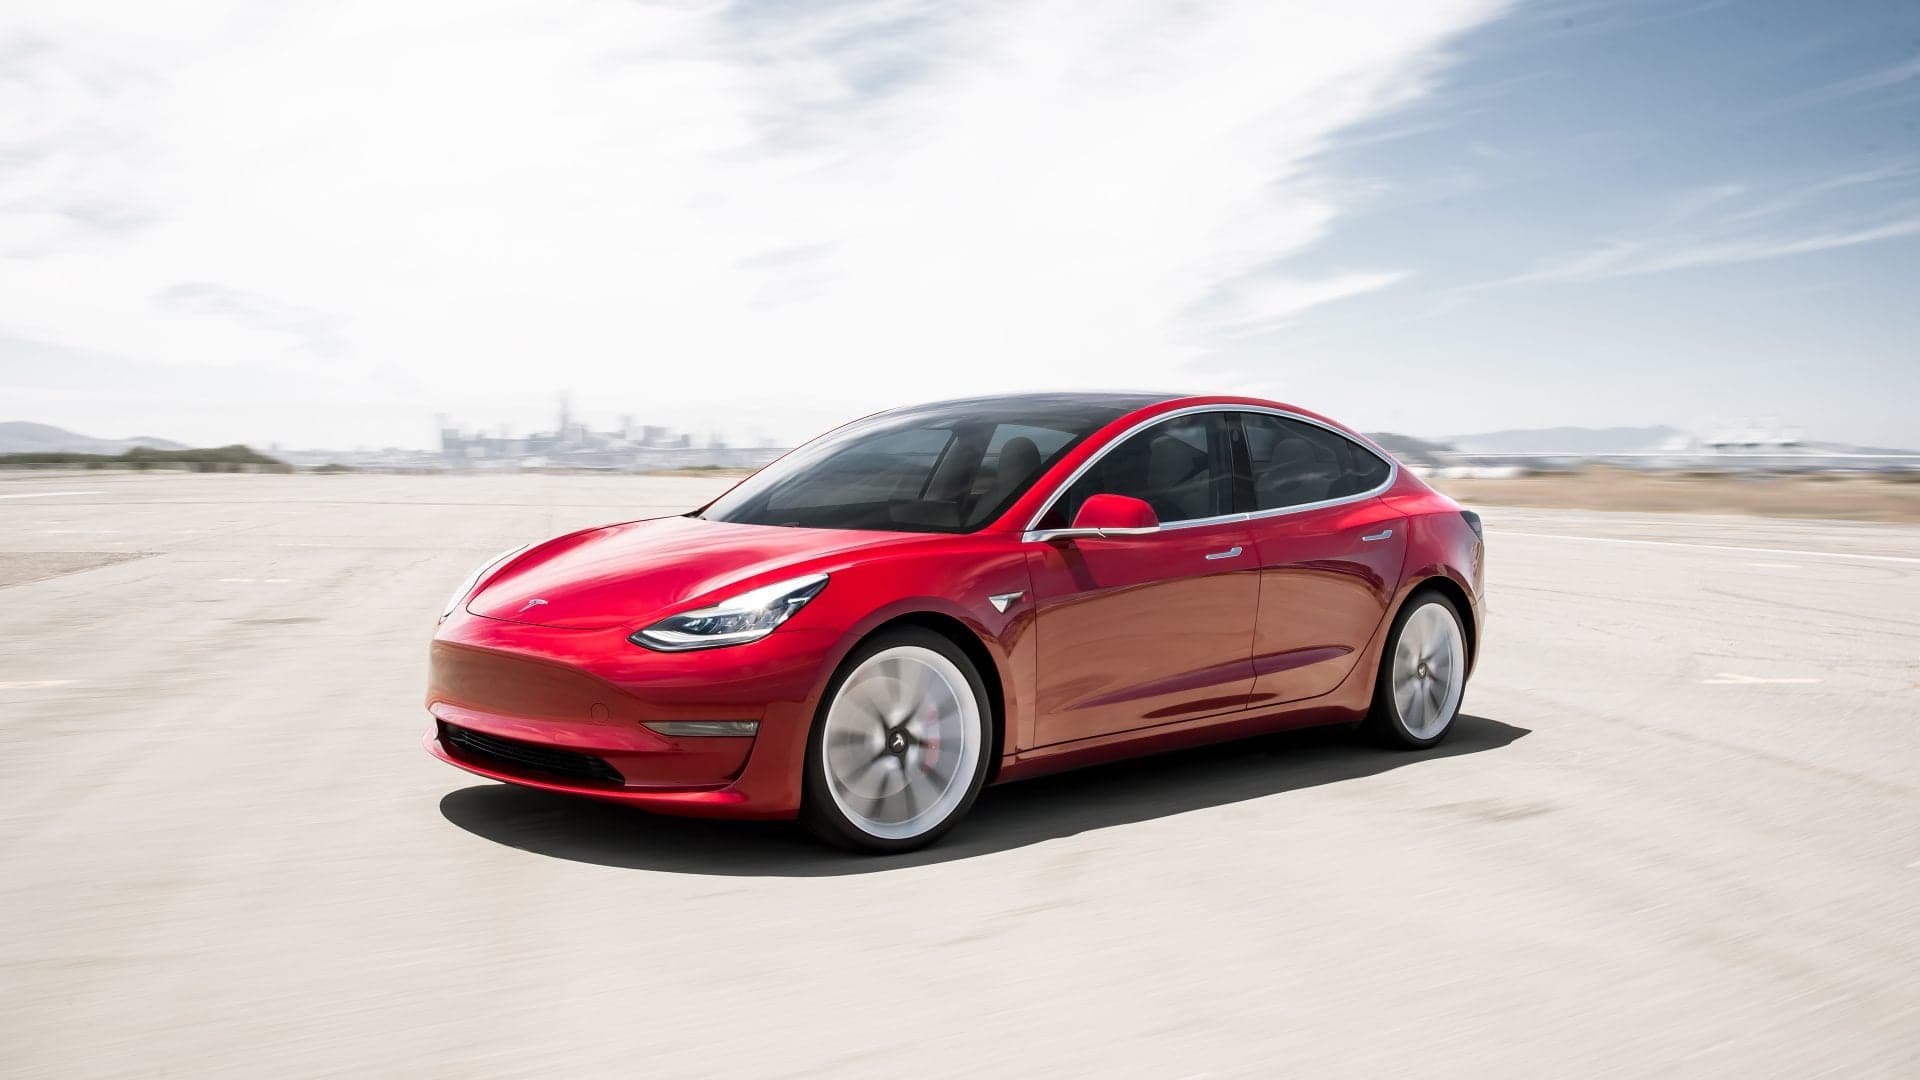 NHTSA: Tesla Model 3 Gets Five-Star Safety Rating in All Categories